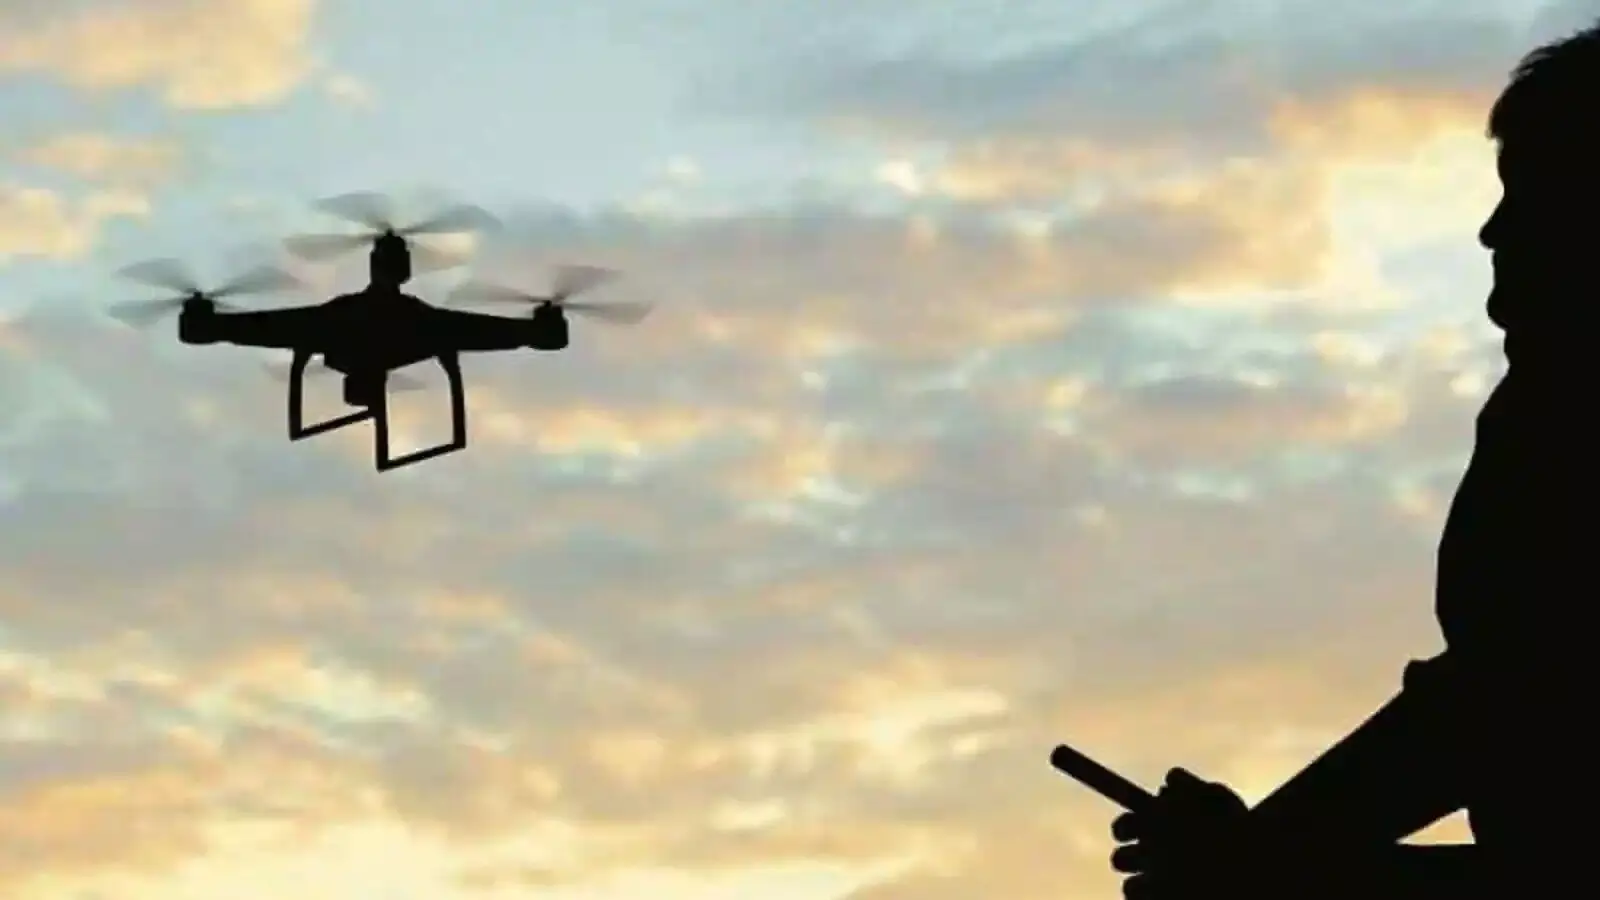 Gujarat: Drone operation to be part of ITI curriculum